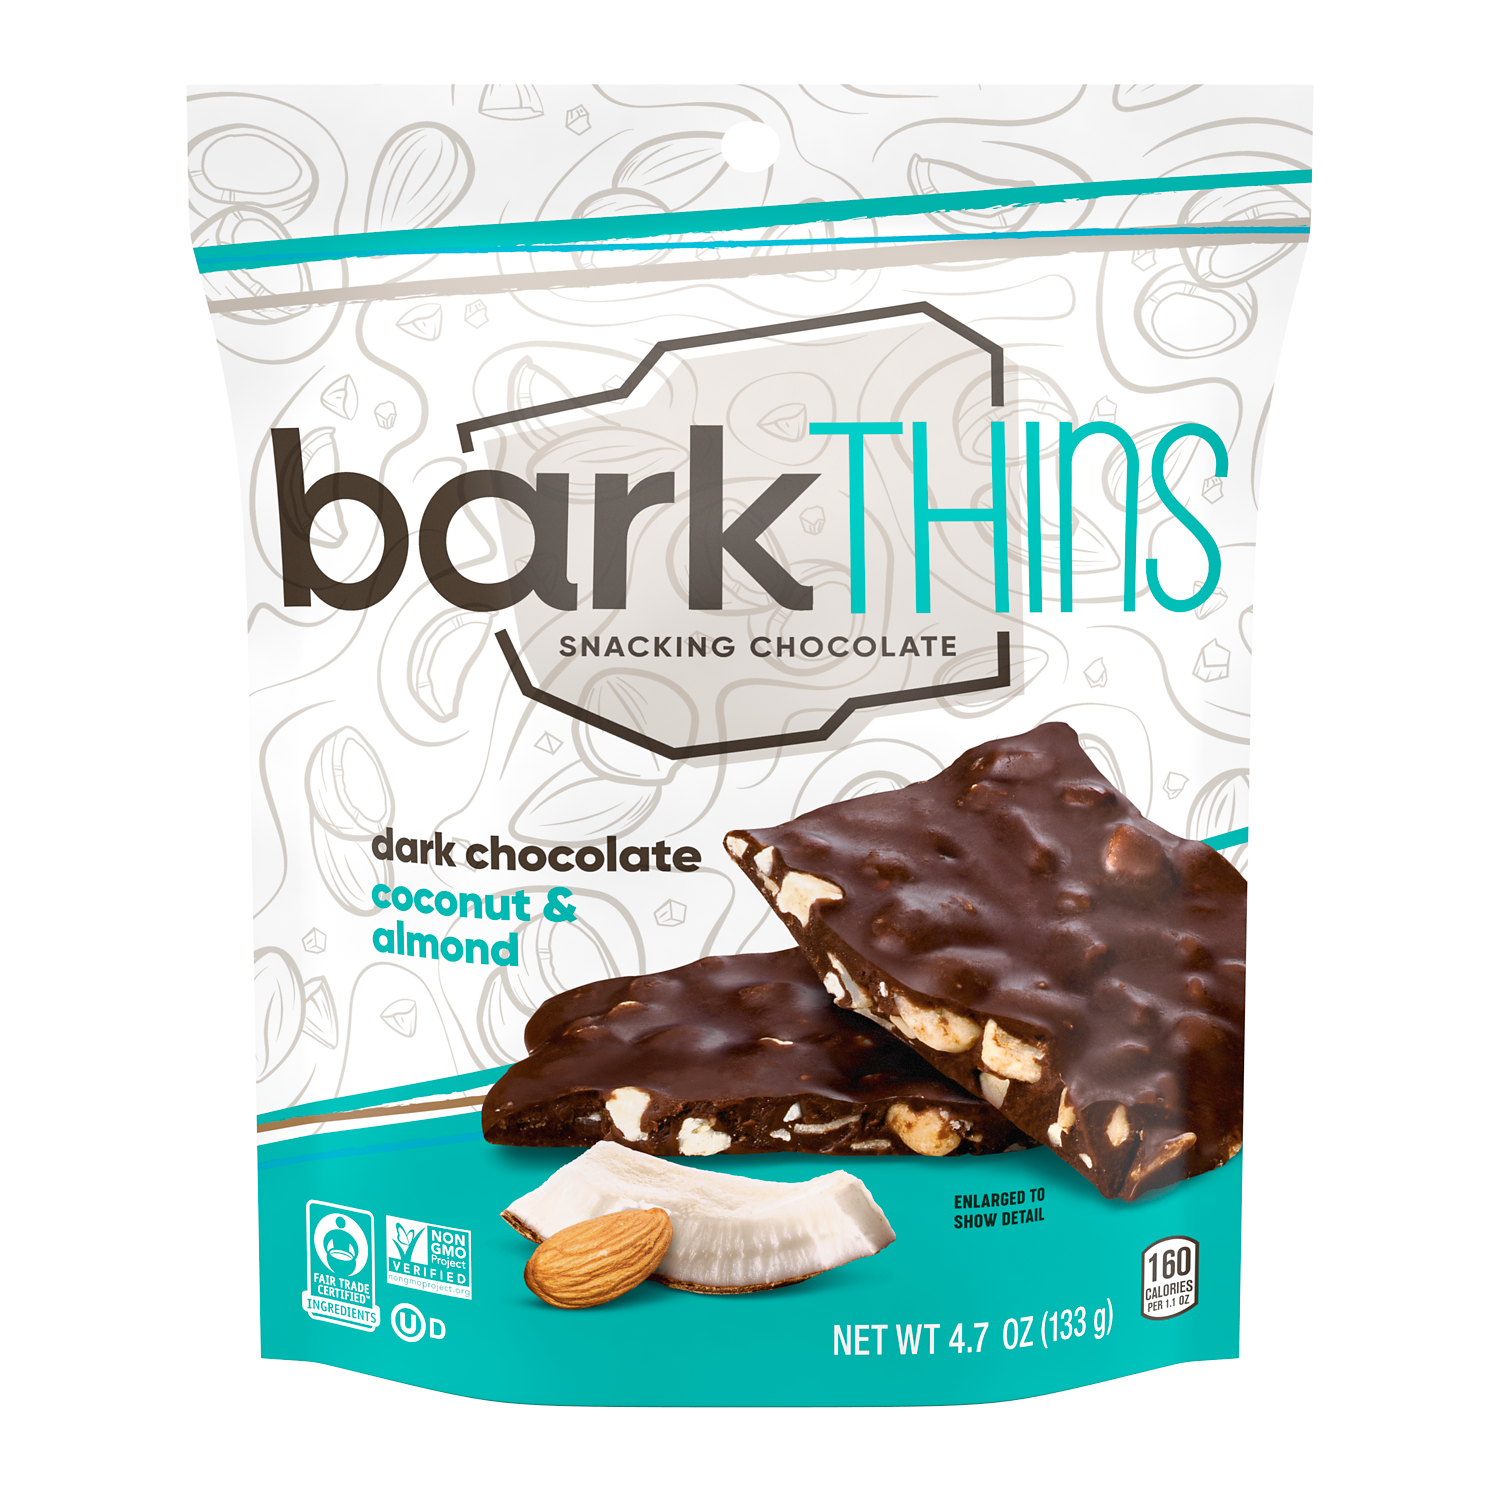 barkTHINS Dark Chocolate Coconut & Almond Snacking Chocolate, 4.7 oz bag - Front of Package